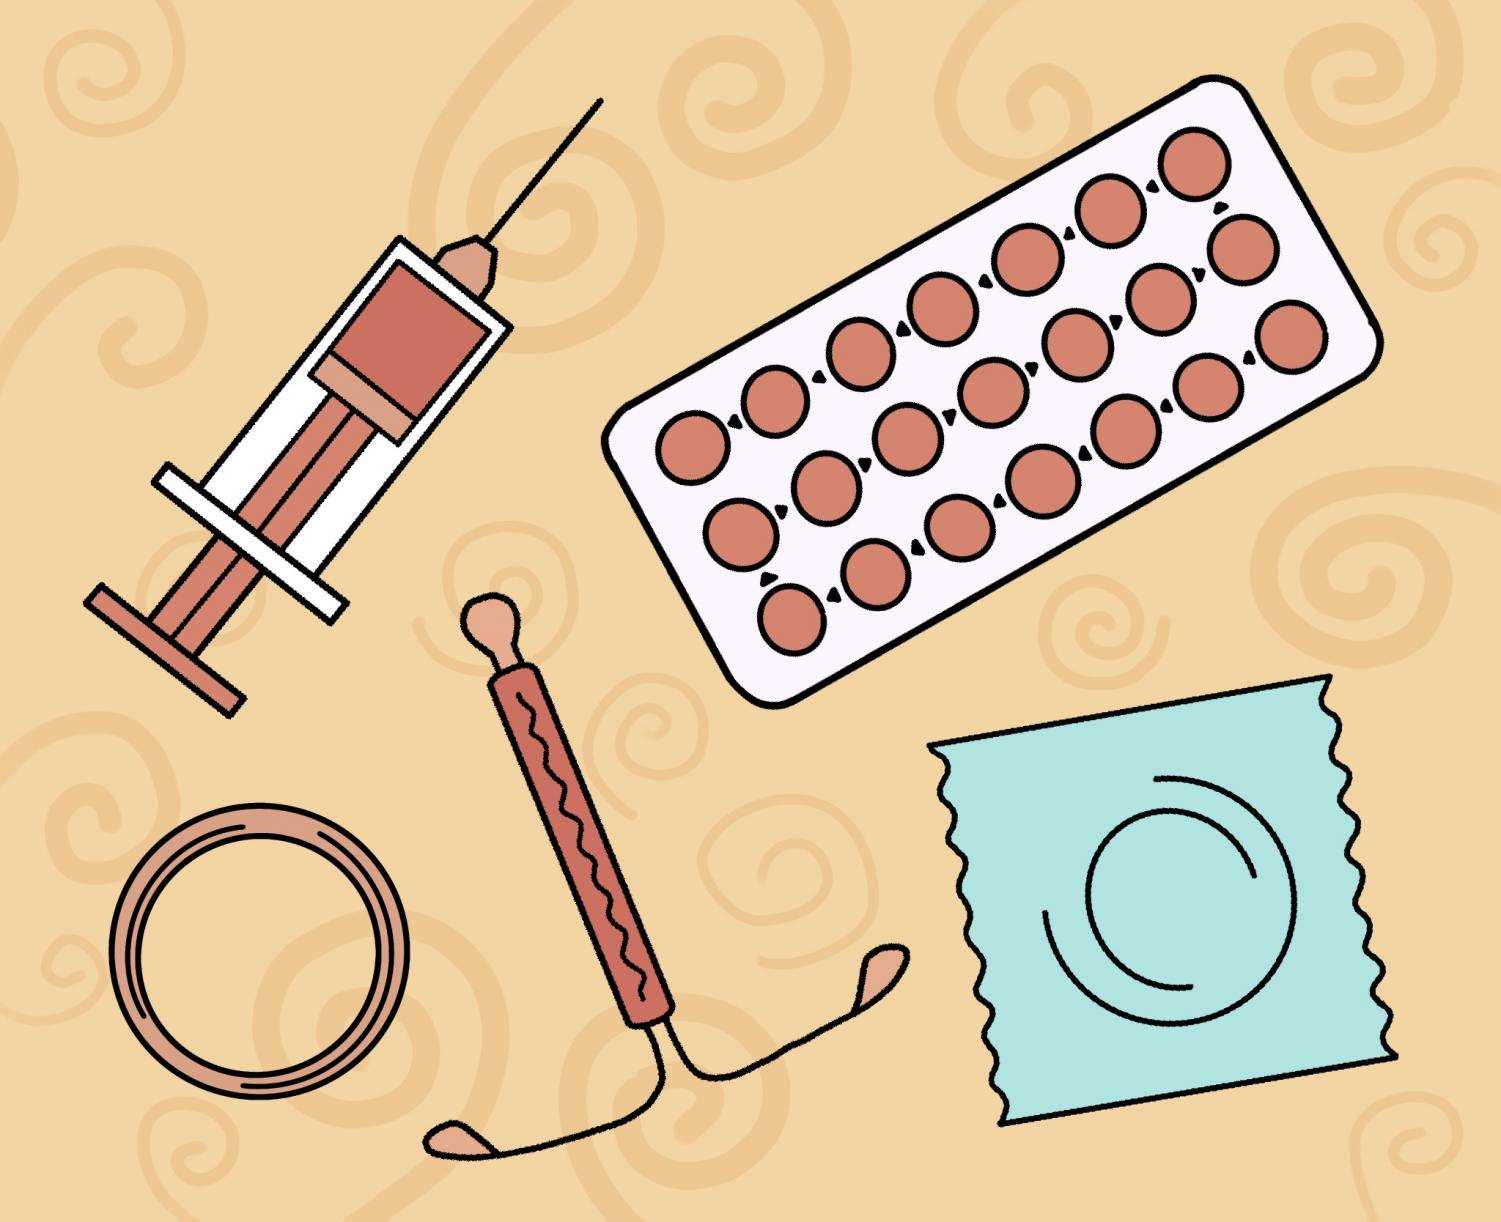 An illustration of various contraceptive devices and medications